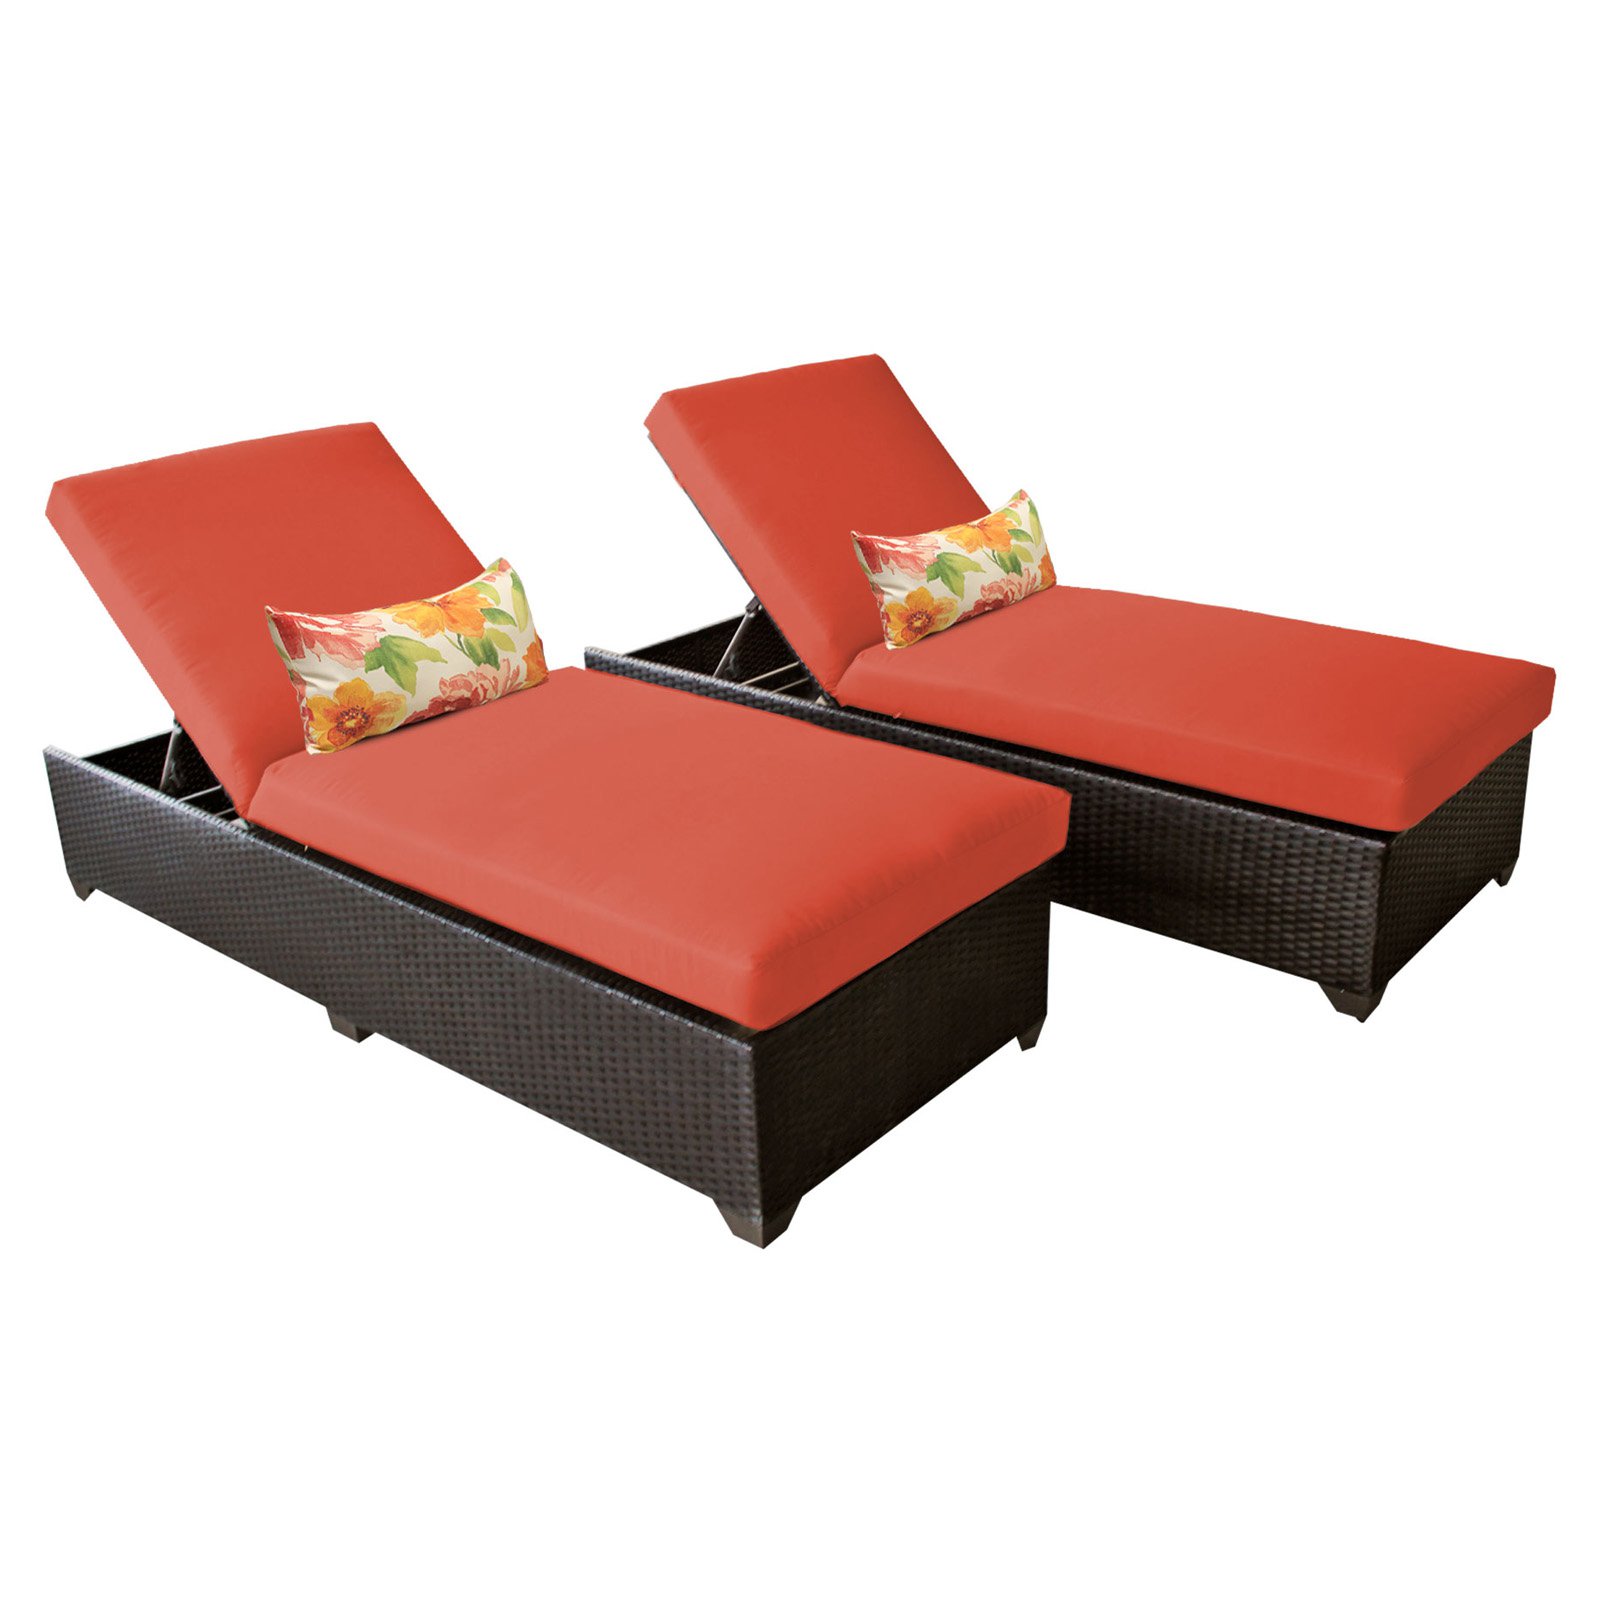 Belle Chaise Set of 2 Outdoor Wicker Patio Furniture-Color:Tangerine - image 1 of 11